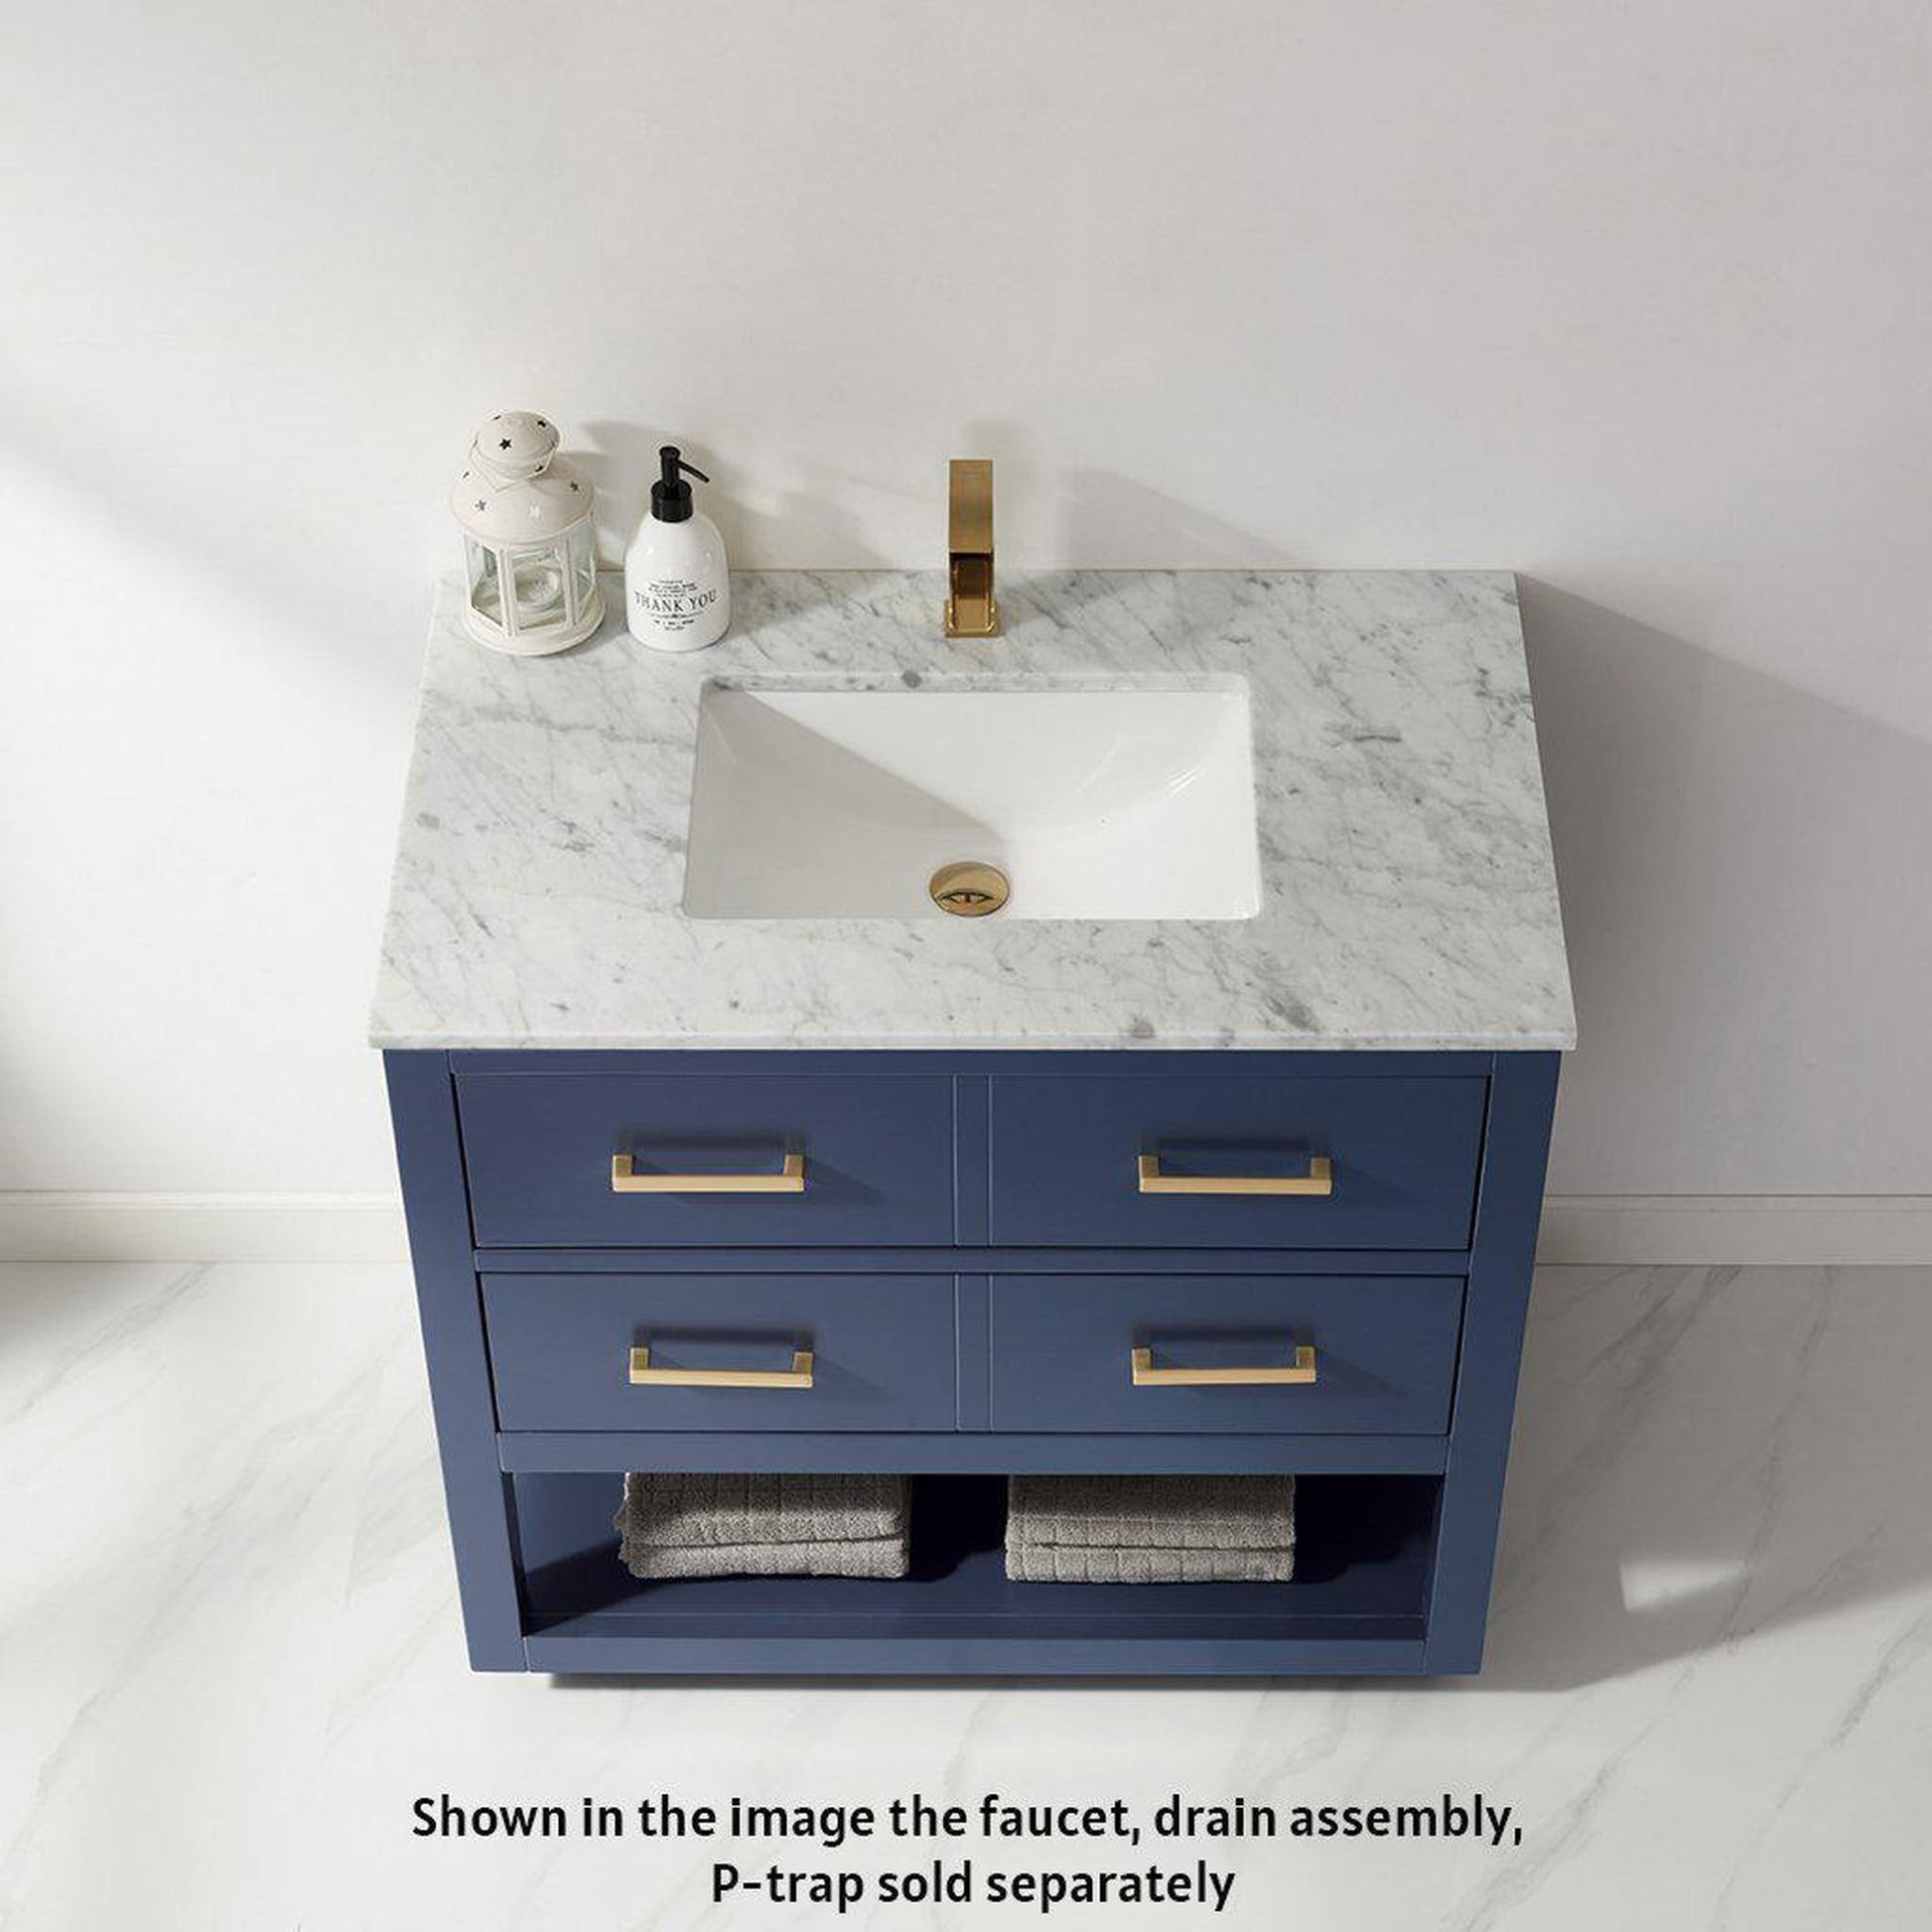 Altair Remi 36" Single Royal Blue Freestanding Bathroom Vanity Set With Natural Carrara White Marble Top, Rectangular Undermount Ceramic Sink, and Overflow